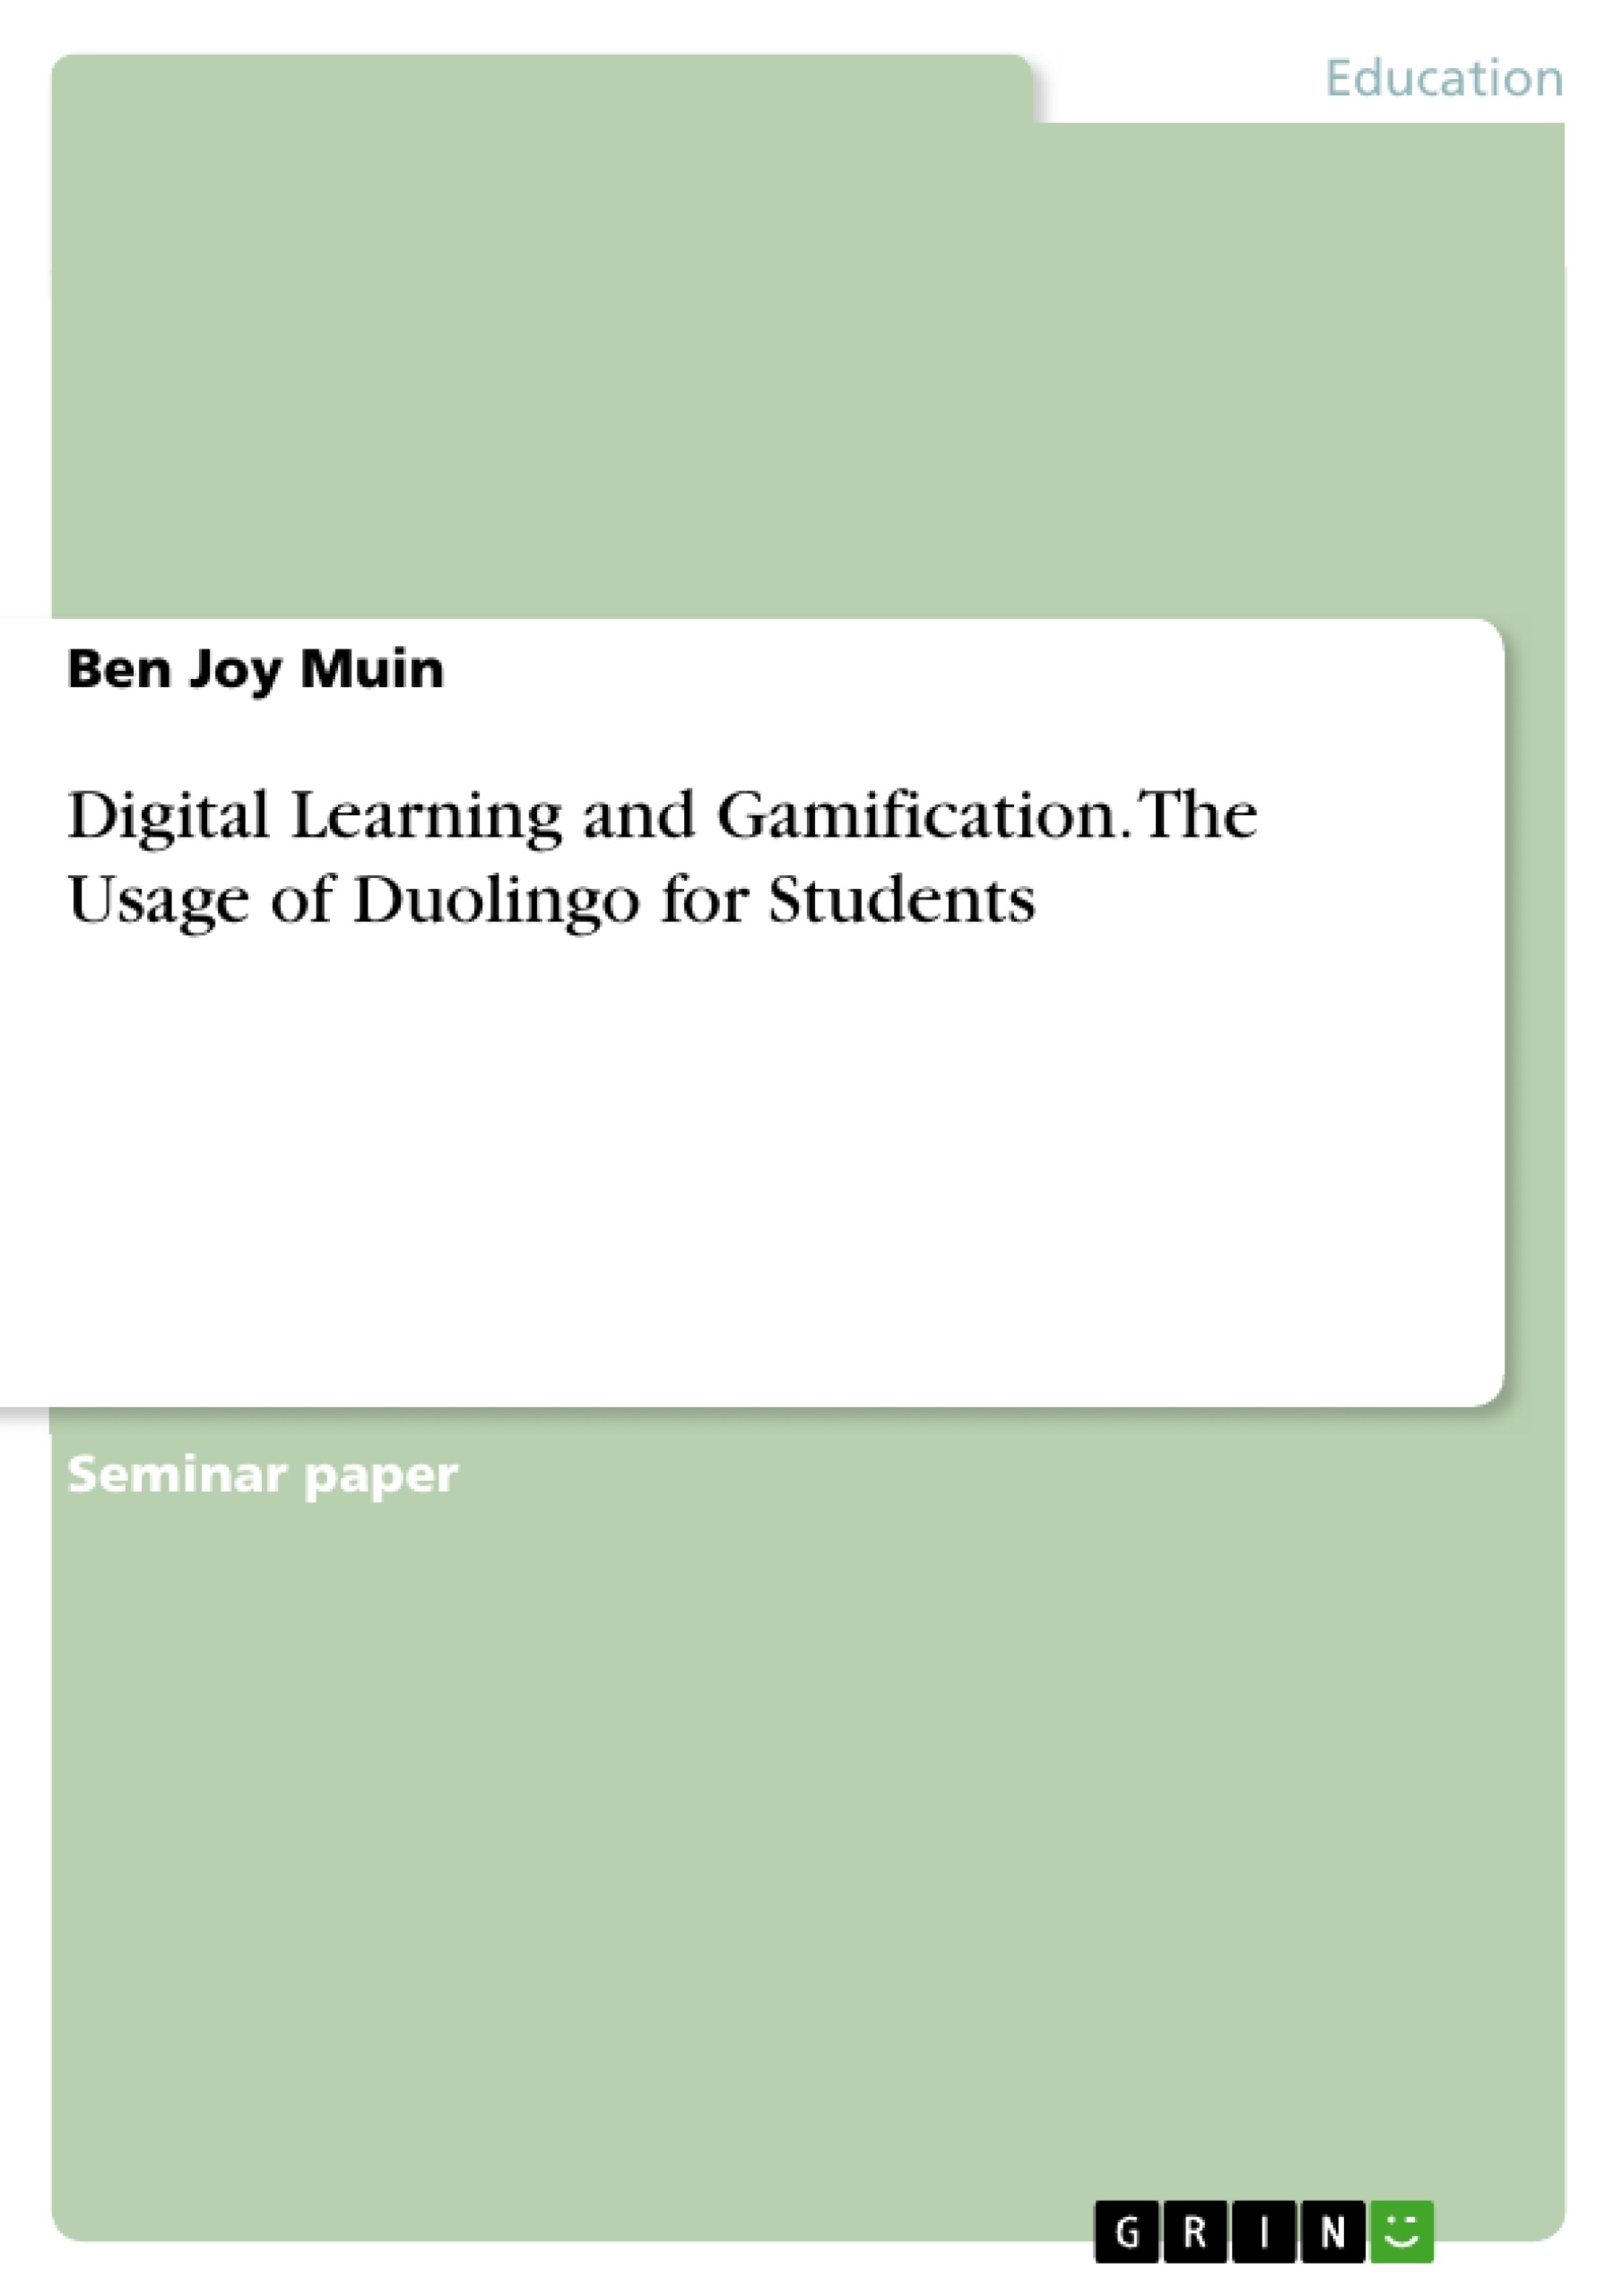 Title: Digital Learning and Gamification. The Usage of Duolingo for Students